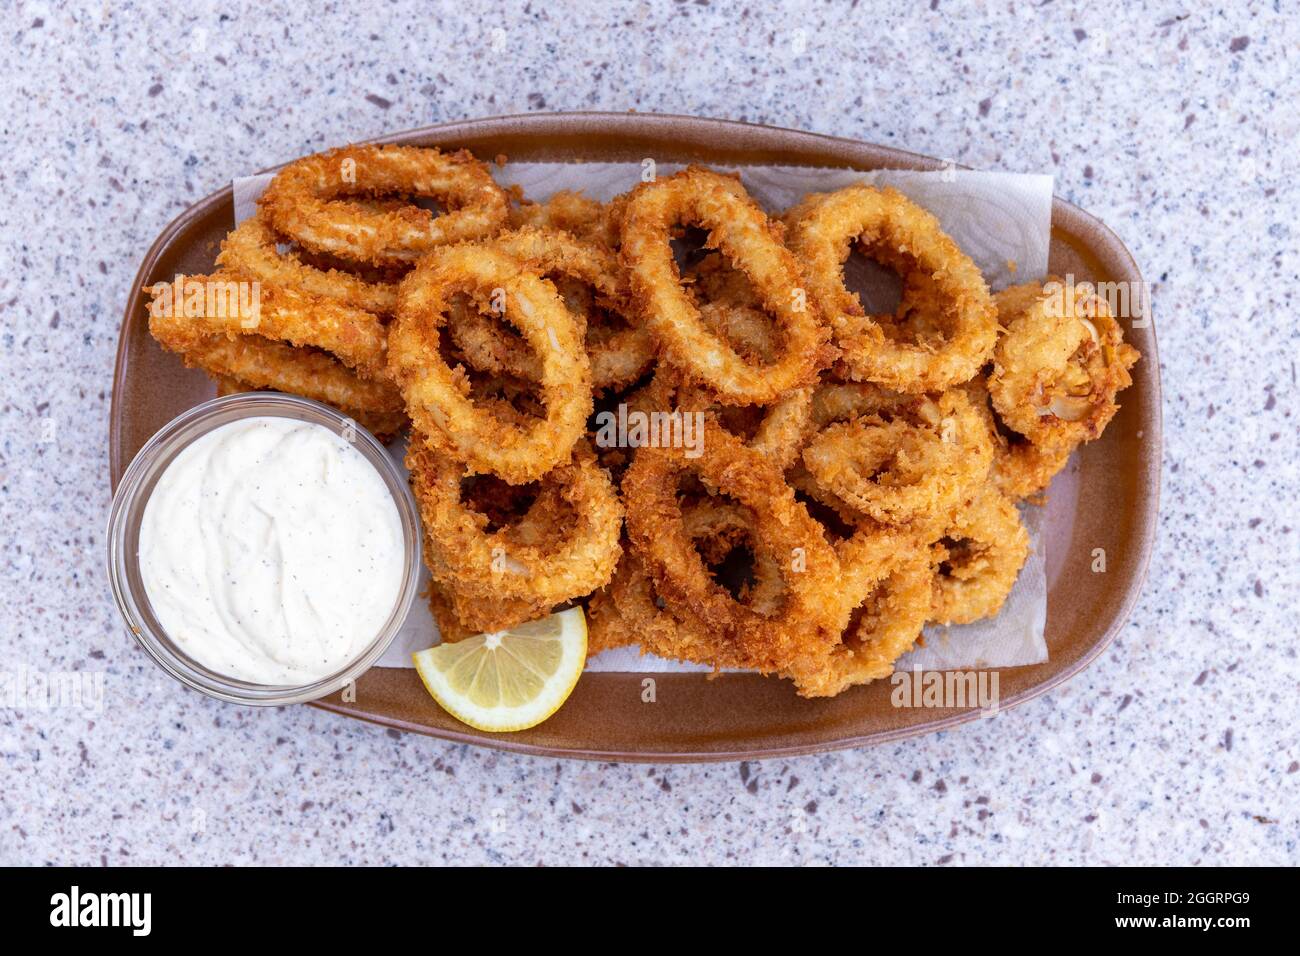 Top View of Crispy Fried Calamari Squid Rings with Lemon and Dipping Sauce Stock Photo